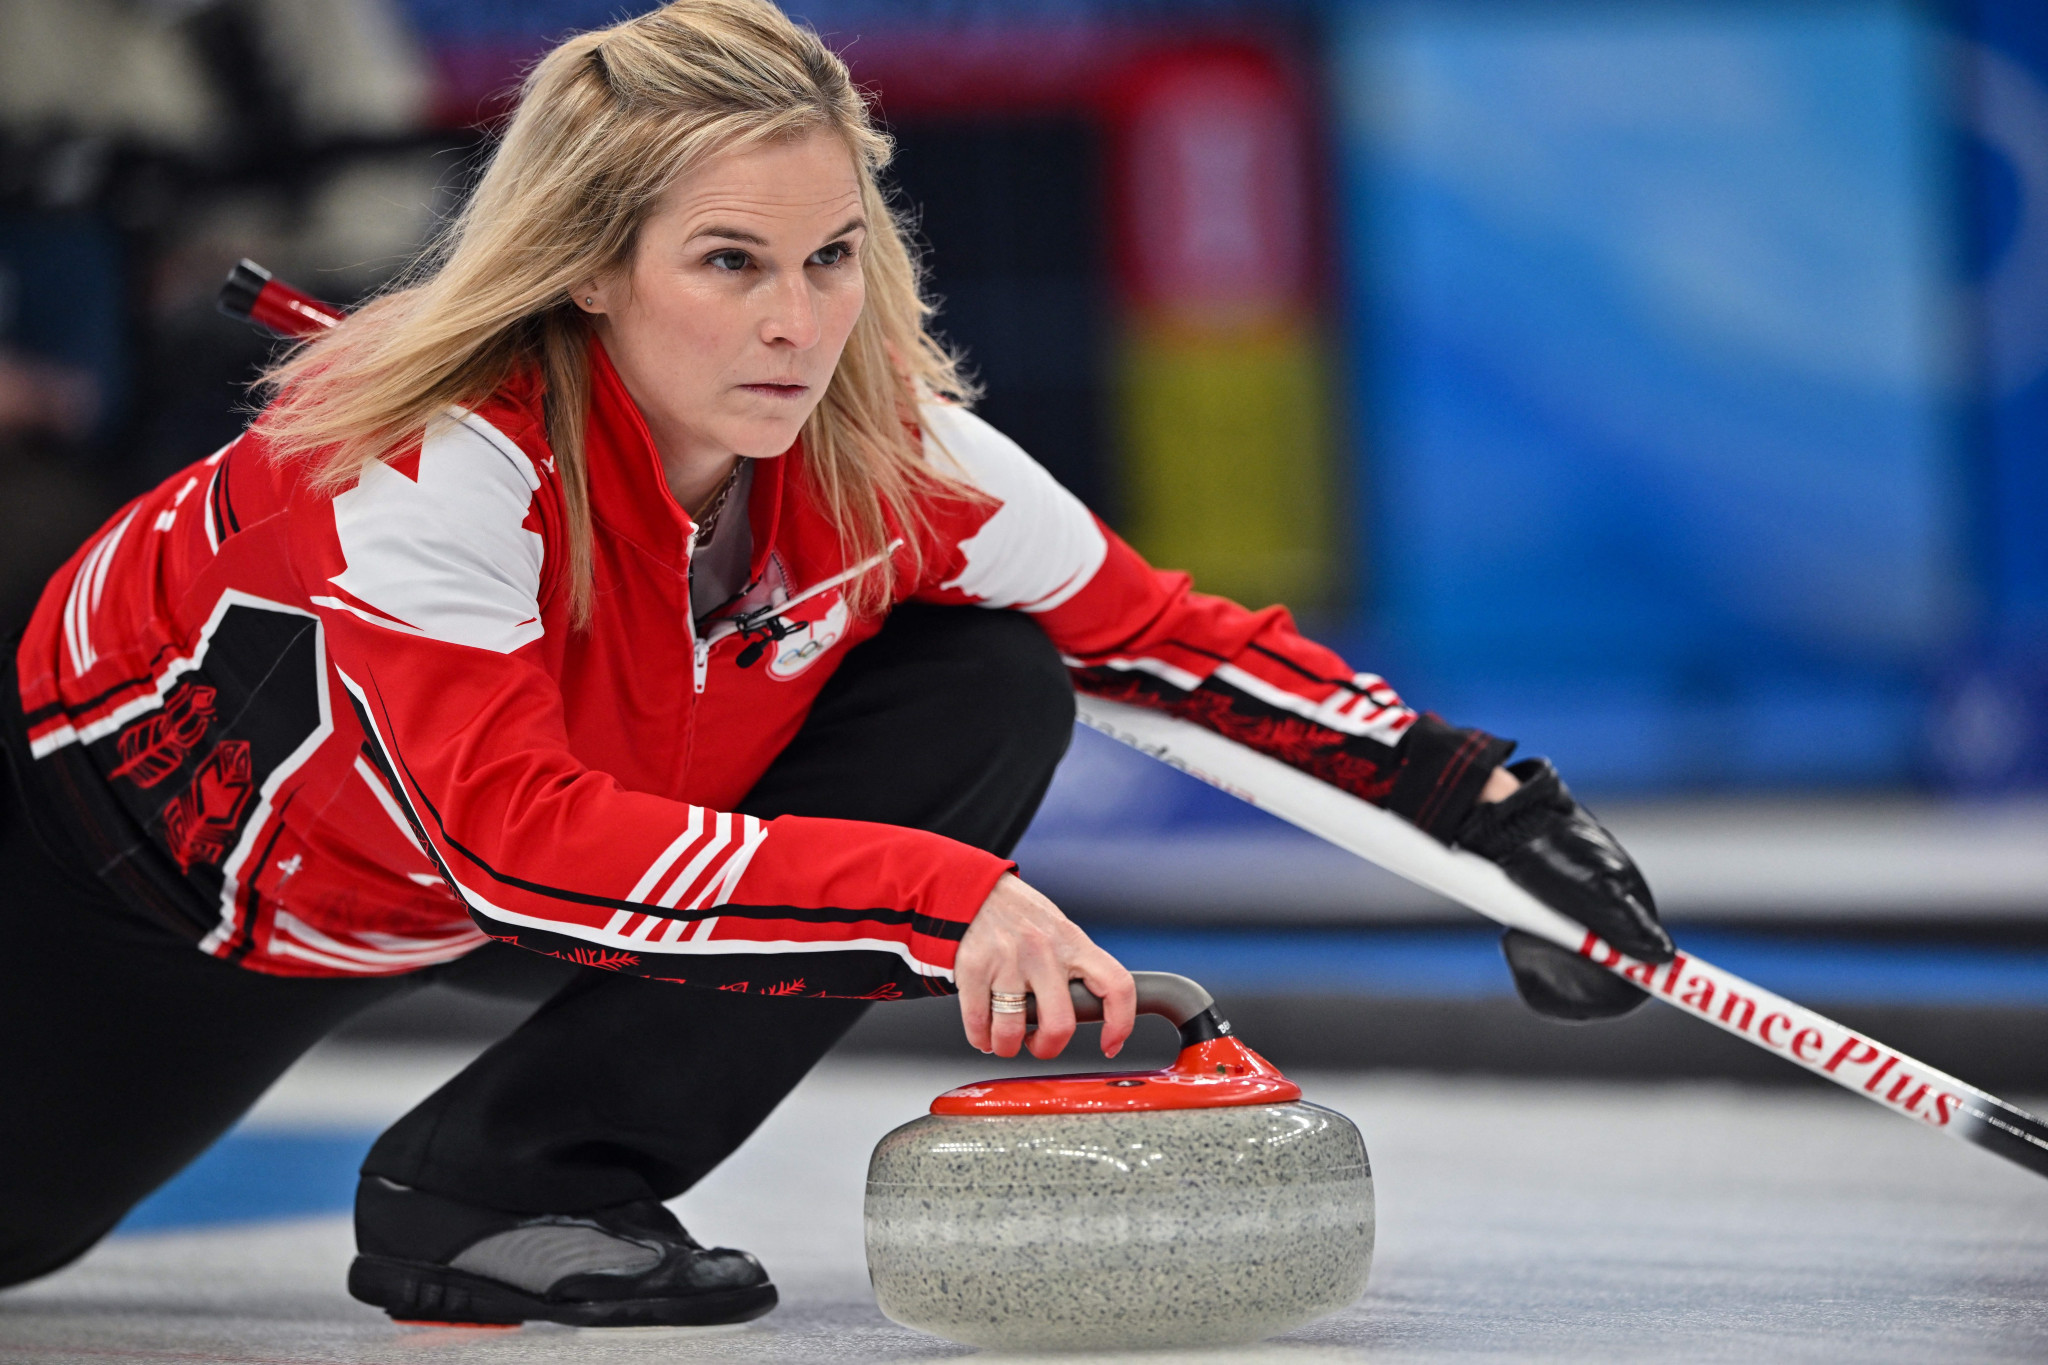 Jennifer Jones teamed up with Brent Laing to seal back-to-back wins on the first day of the World Mixed Doubles Curling Championship in Gangneung ©Getty Images